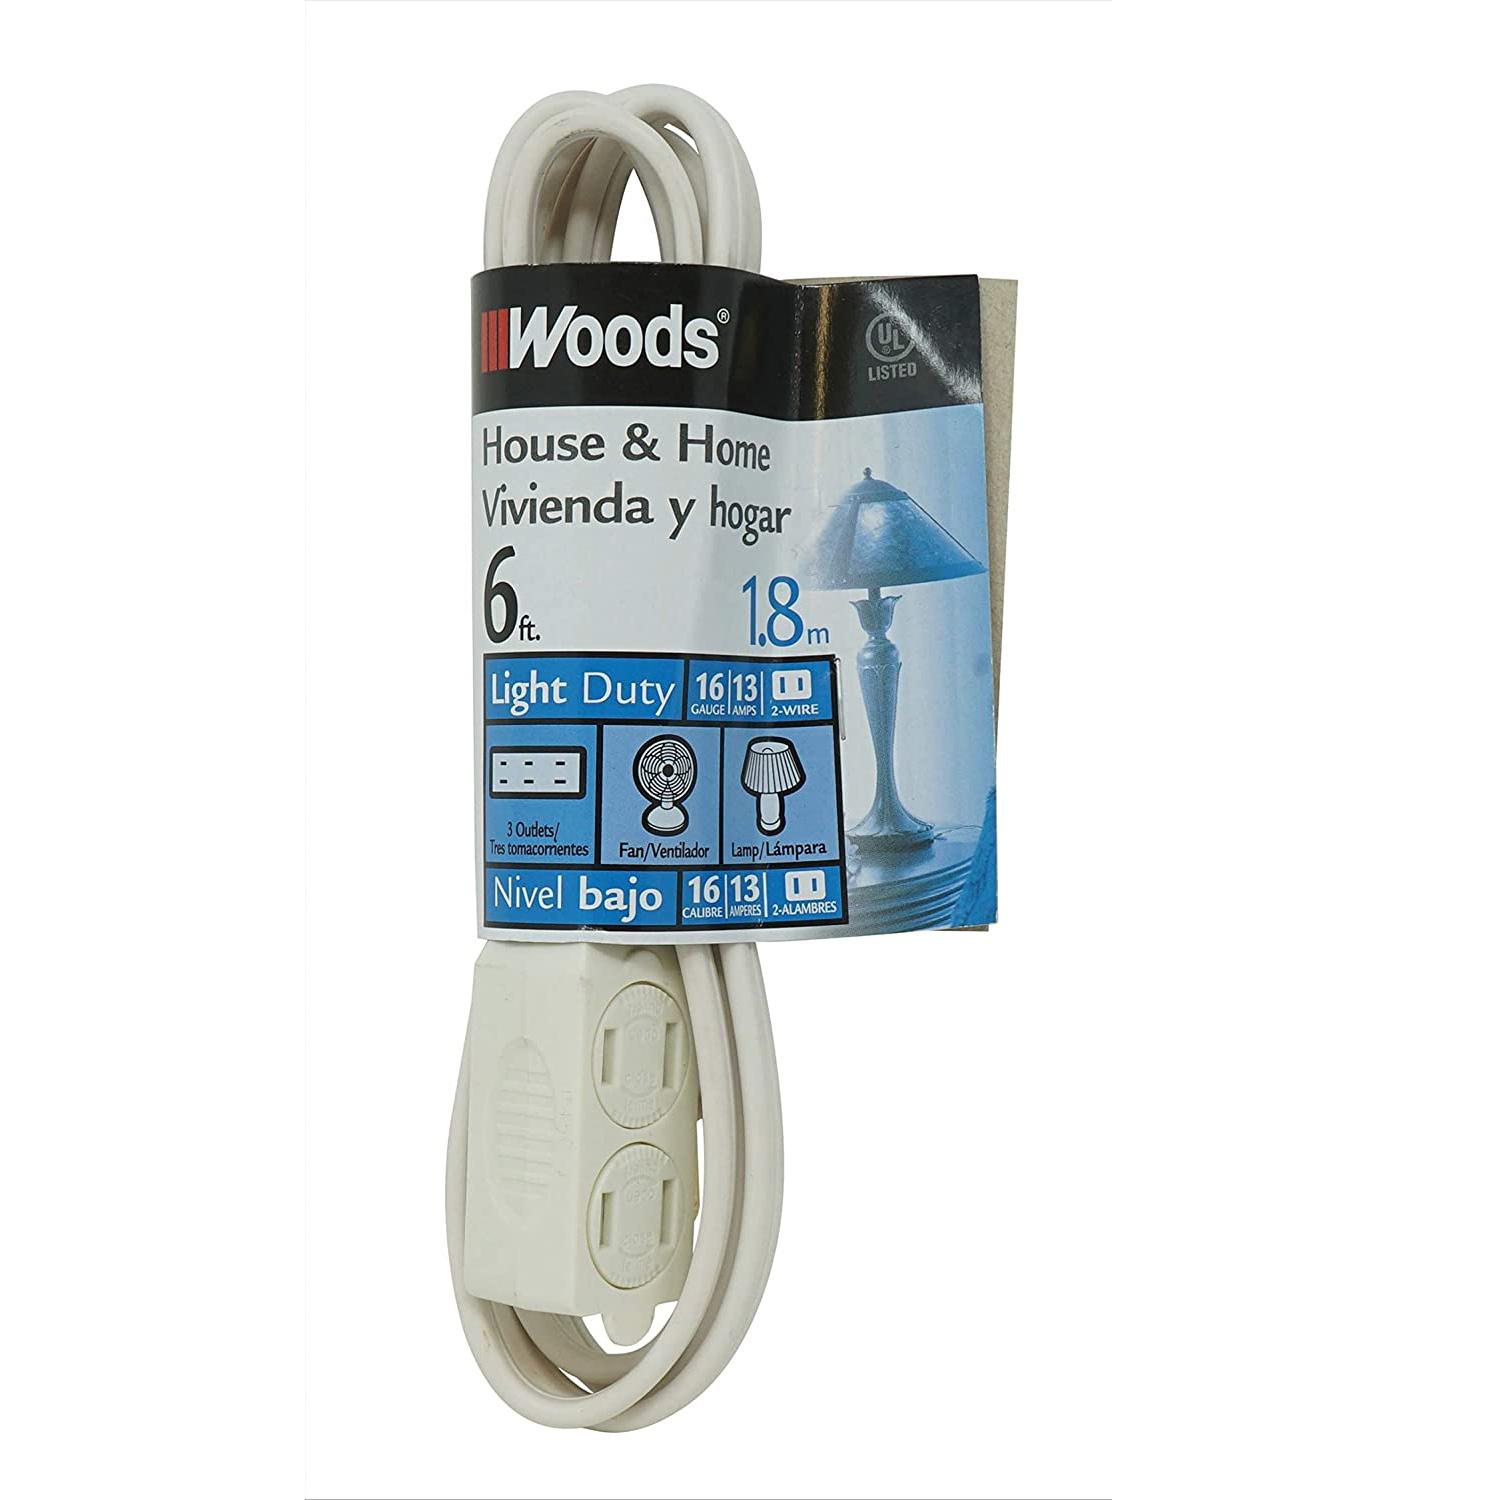 6ft Woods 3-Outlet 16/2 Cube Extension Cord for $1.99